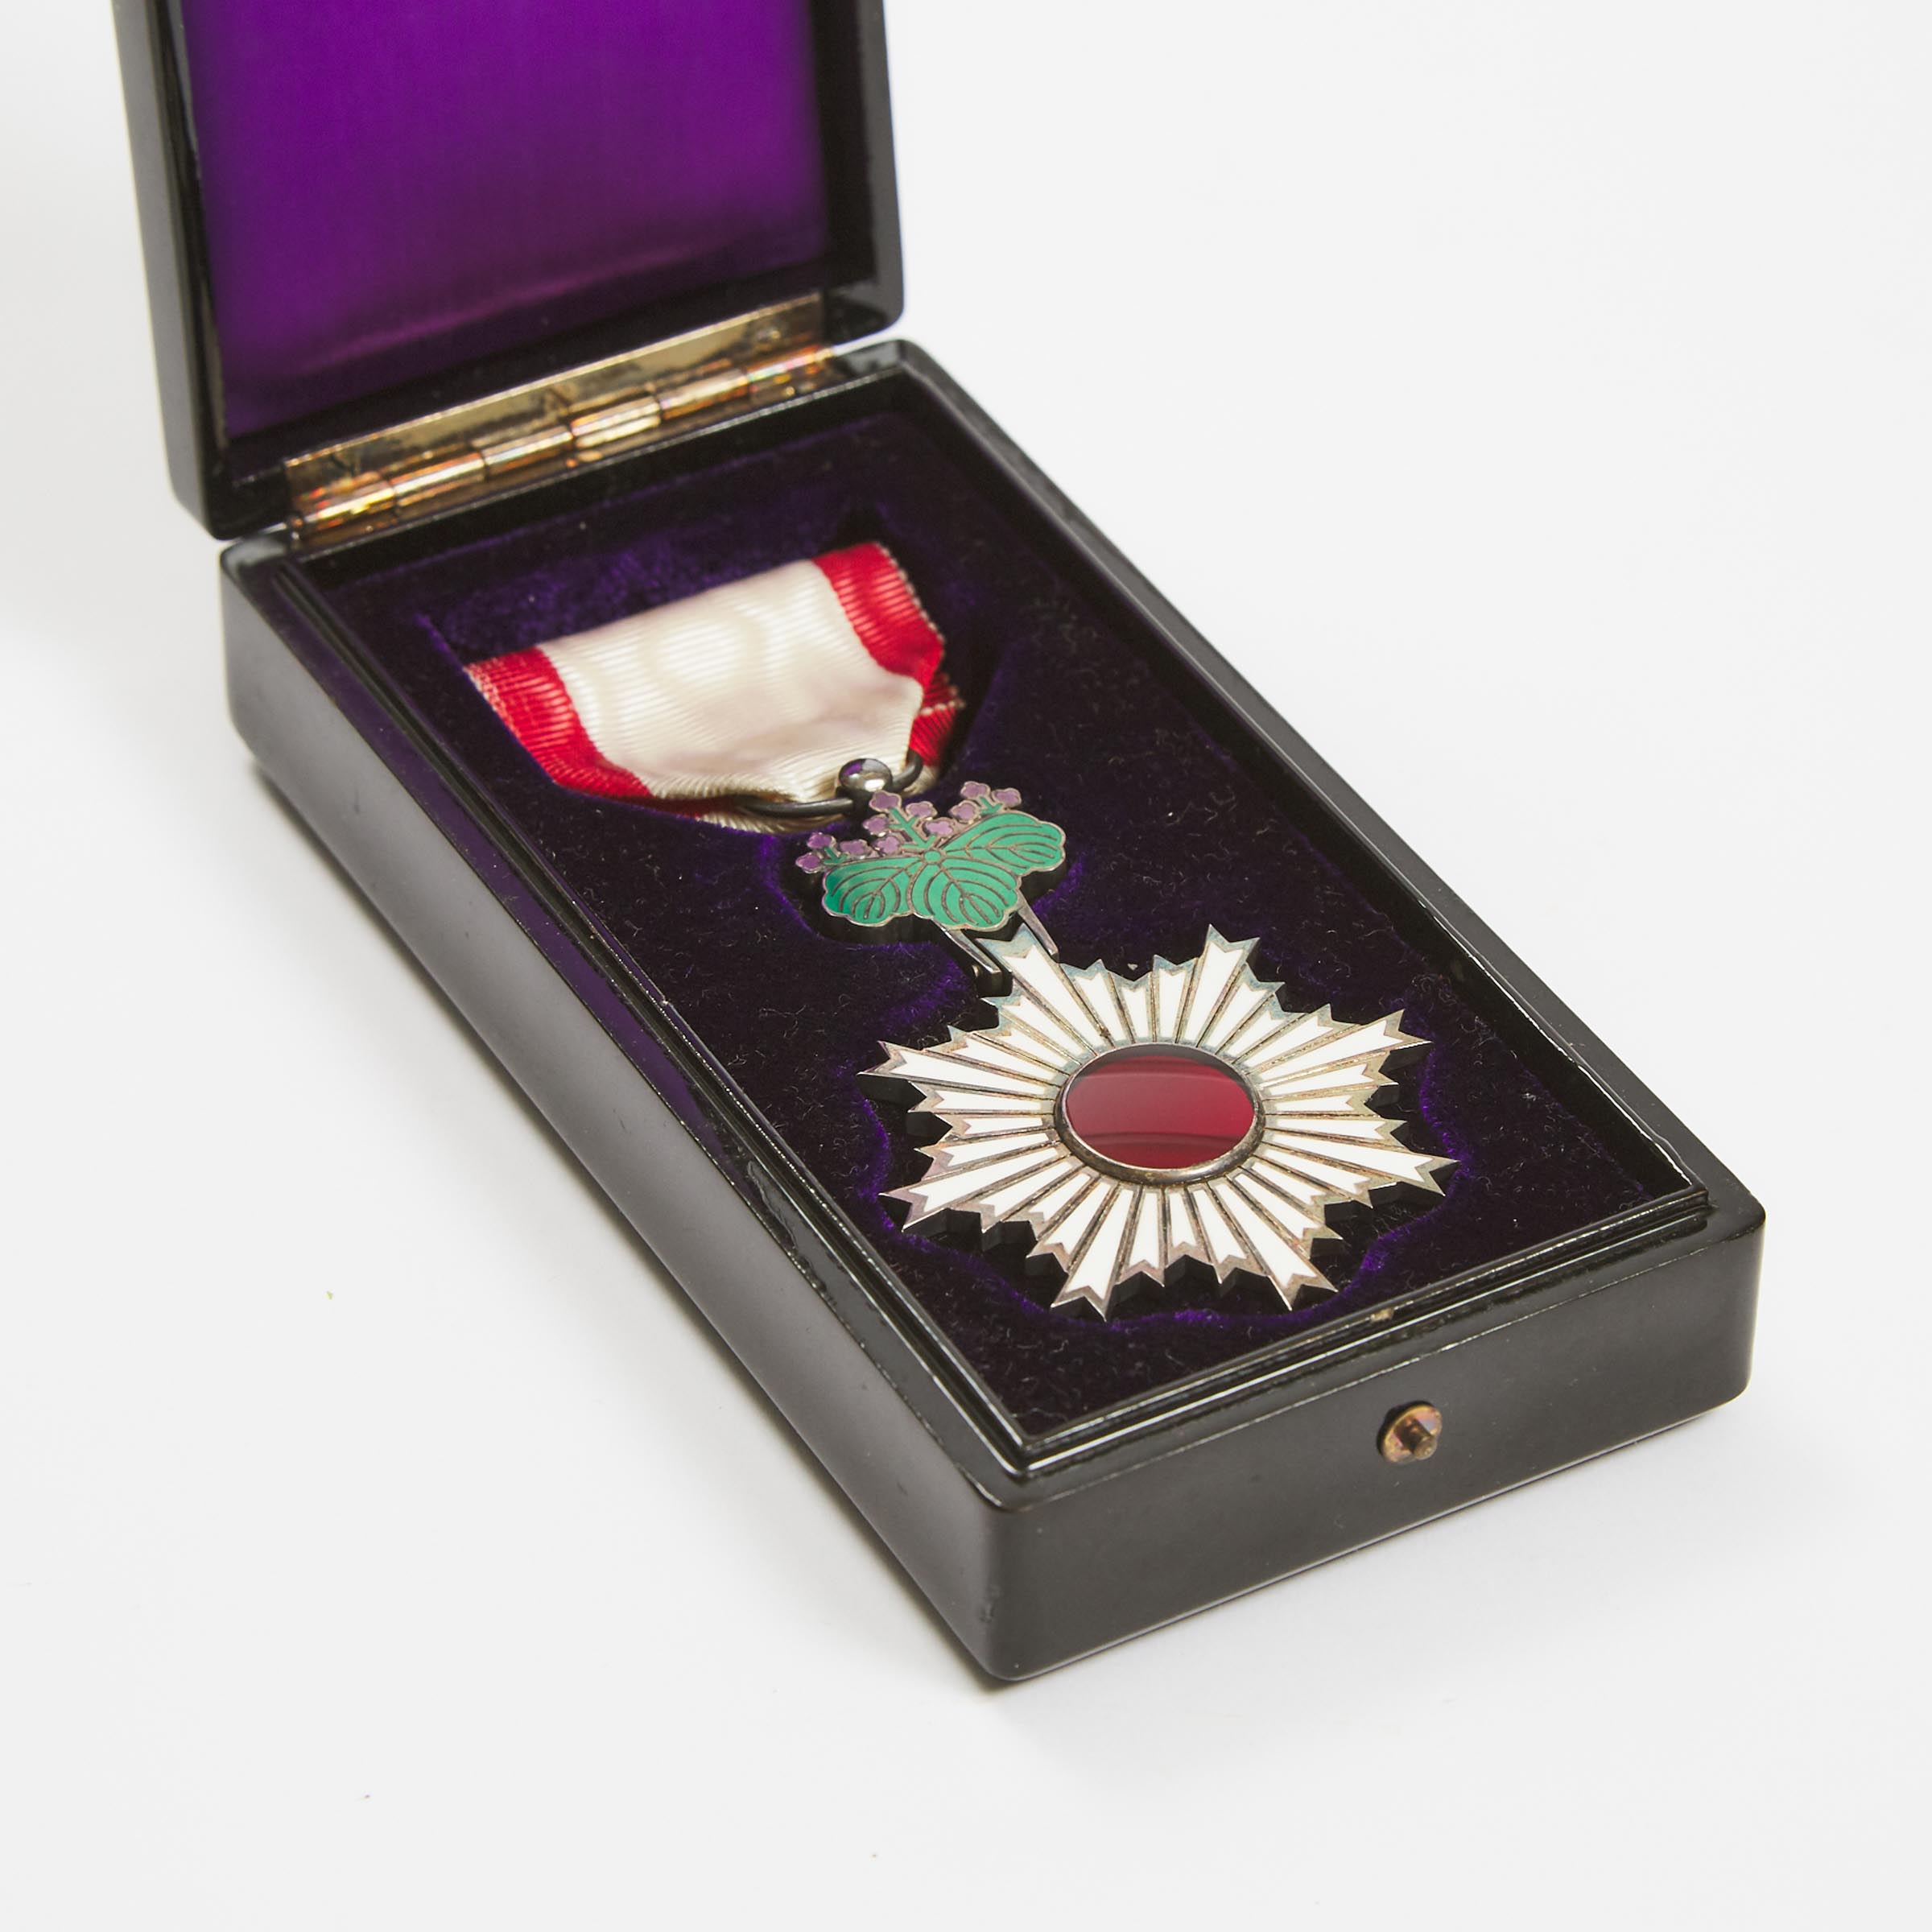 An Imperial Japanese Order of the